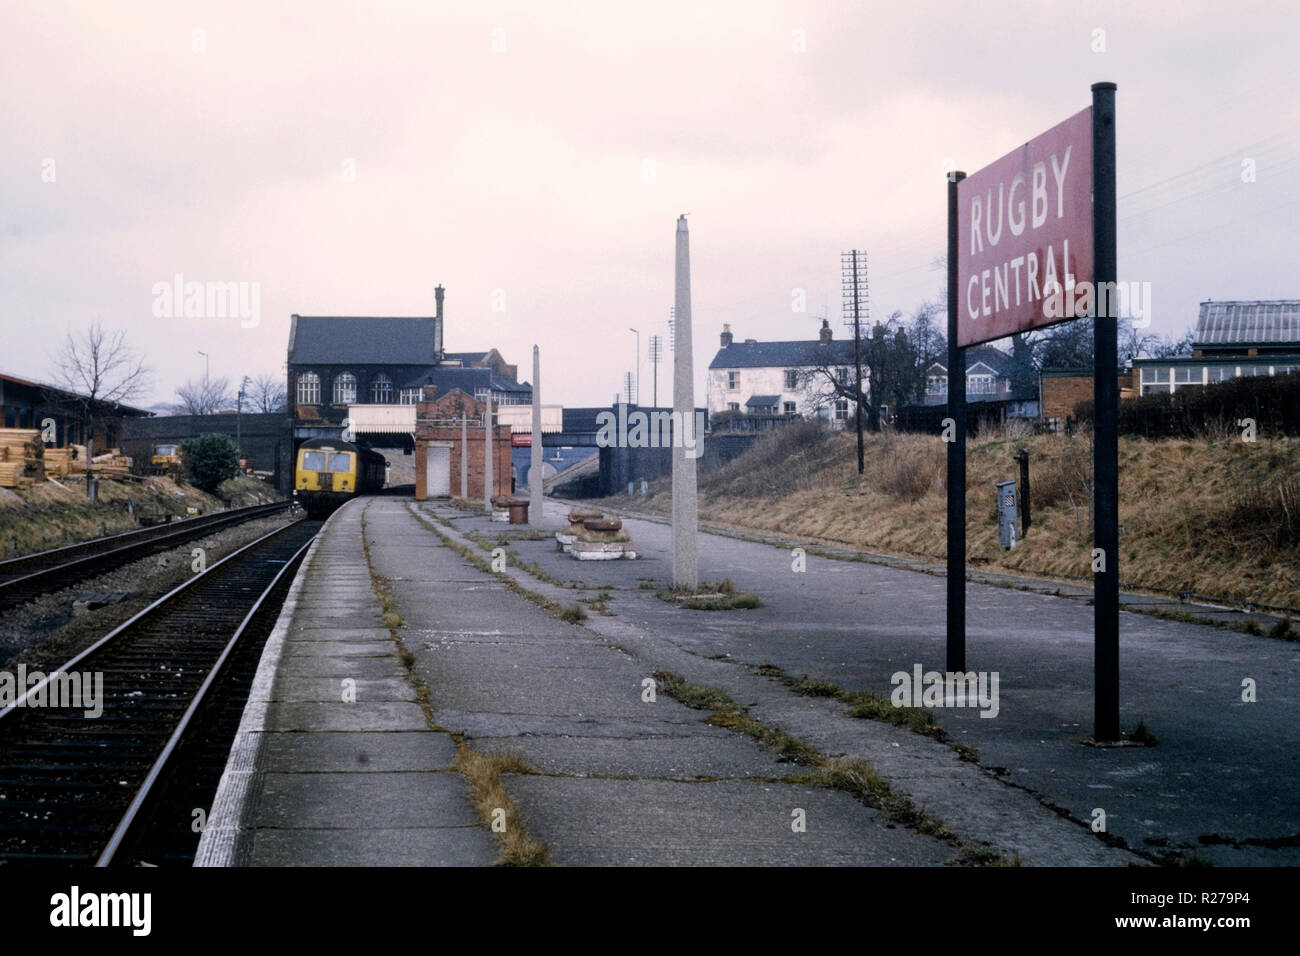 original british rail diesel multiple unit at rugby station on the great central railway shortly before closure in 1969 Stock Photo